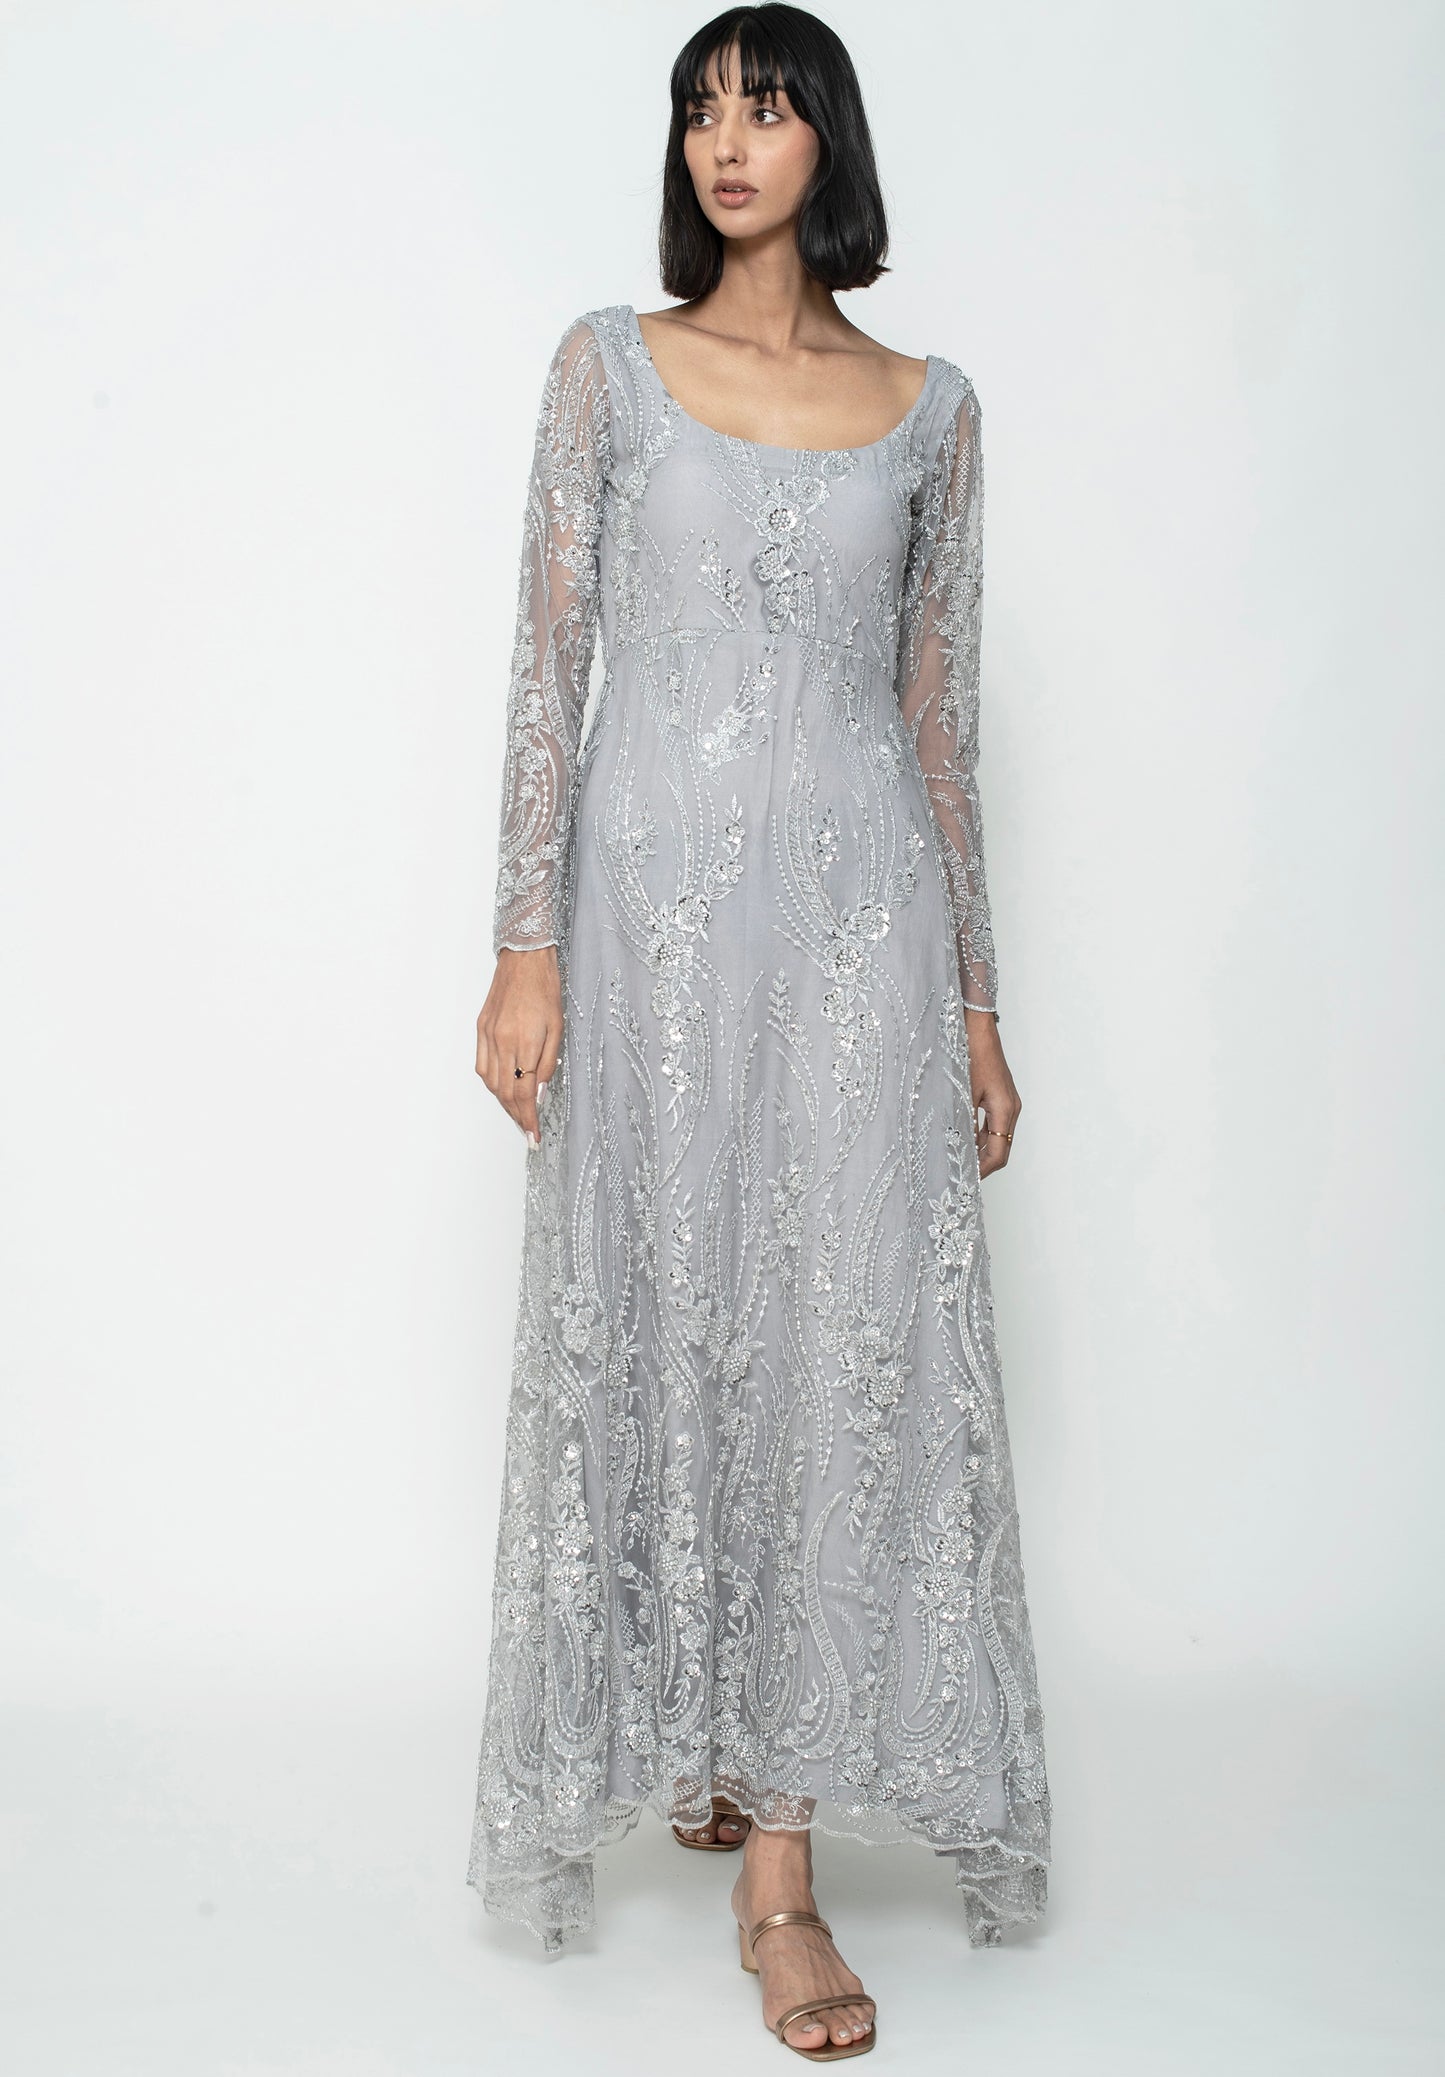 The Silver moon dress